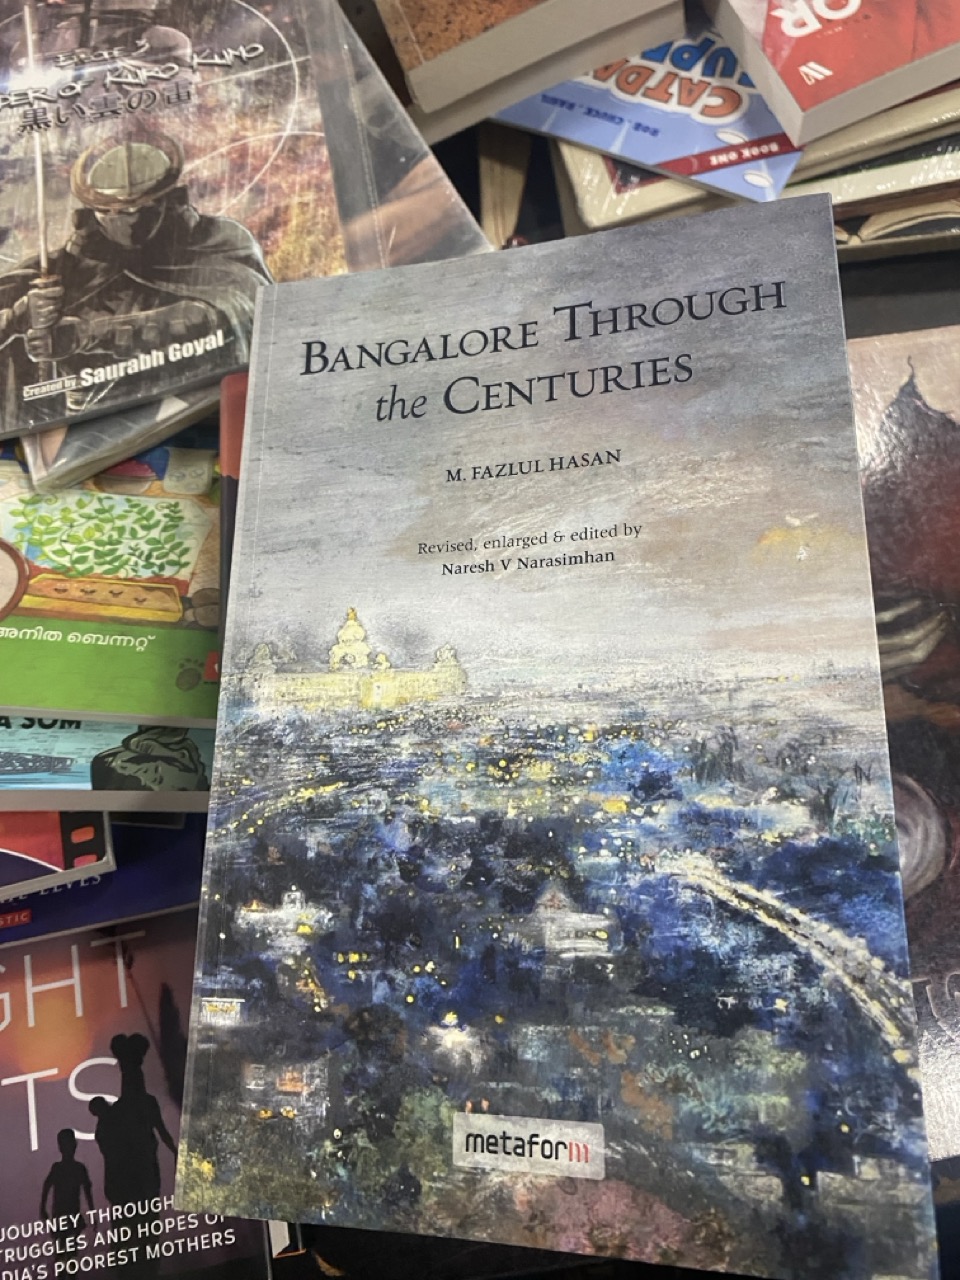 Bangalore through the centuries by Fazlul Hasan. I had seen this title
before at [Blossoms book house](https://www.blossombookhouse.in), but had not picked it up. Maybe next time.
